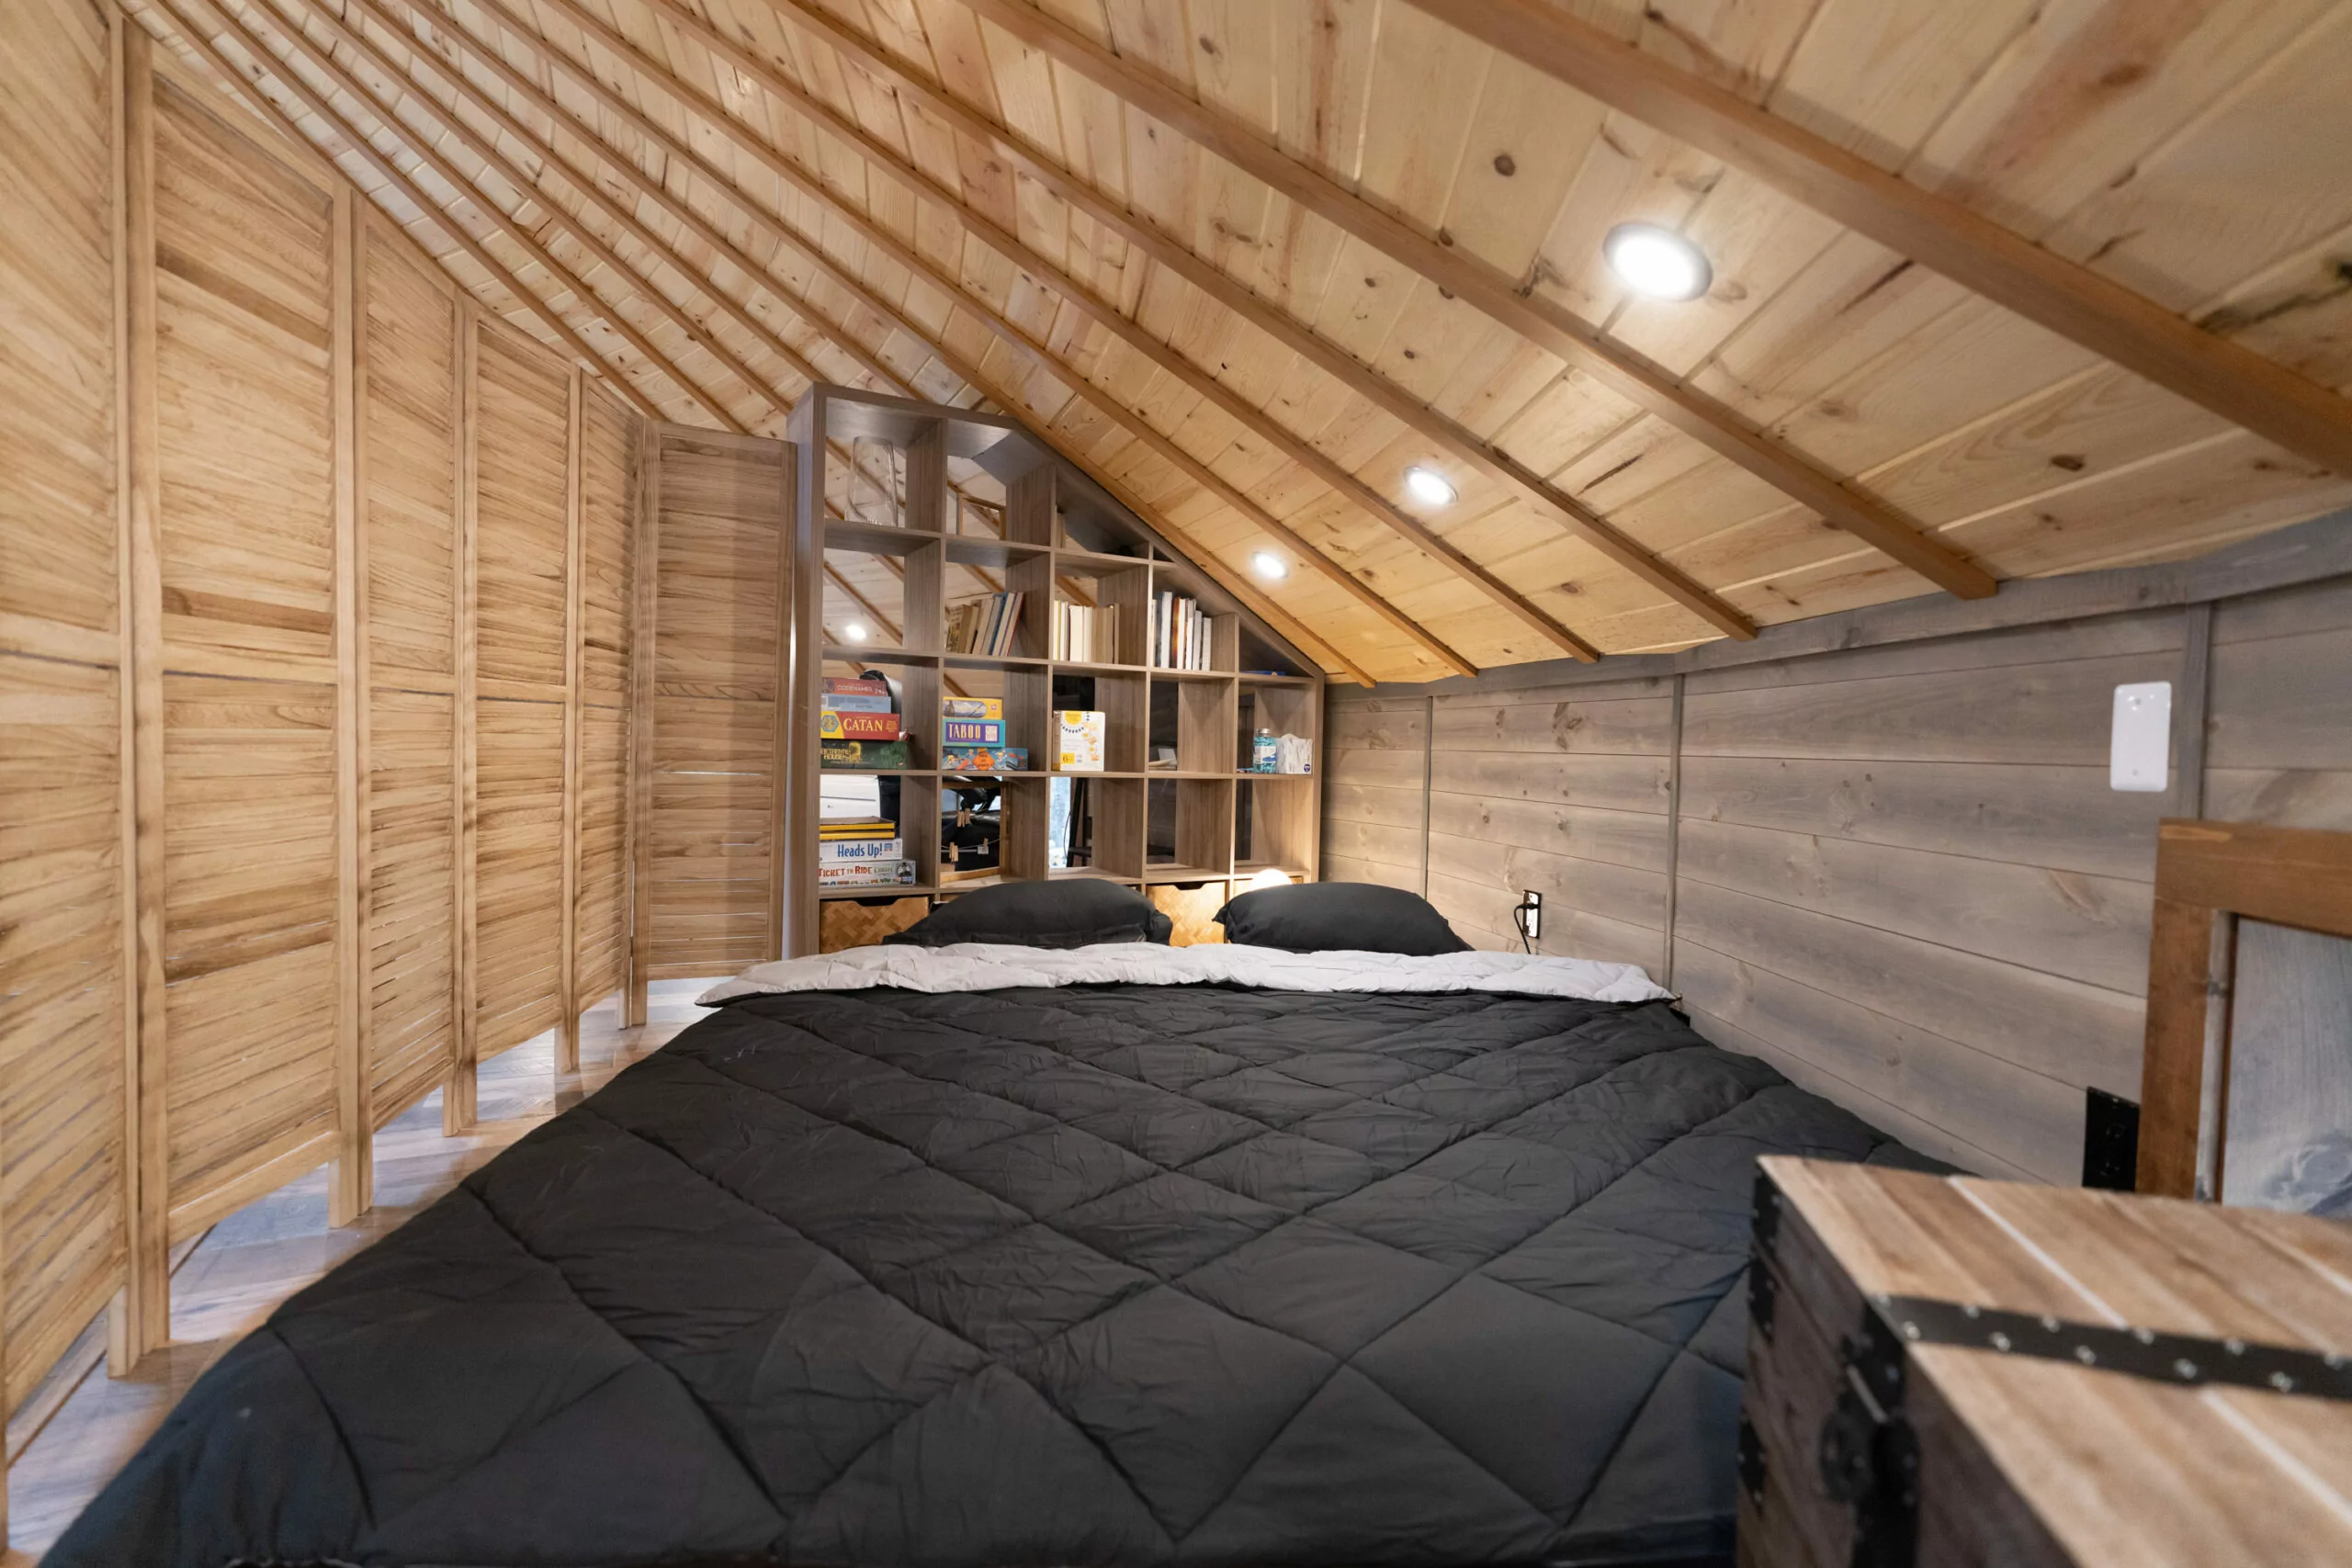 Floor sofa transformed into KING size bed with a privacy screen -- Shenandoah Yurt, Shenandoah Cabin